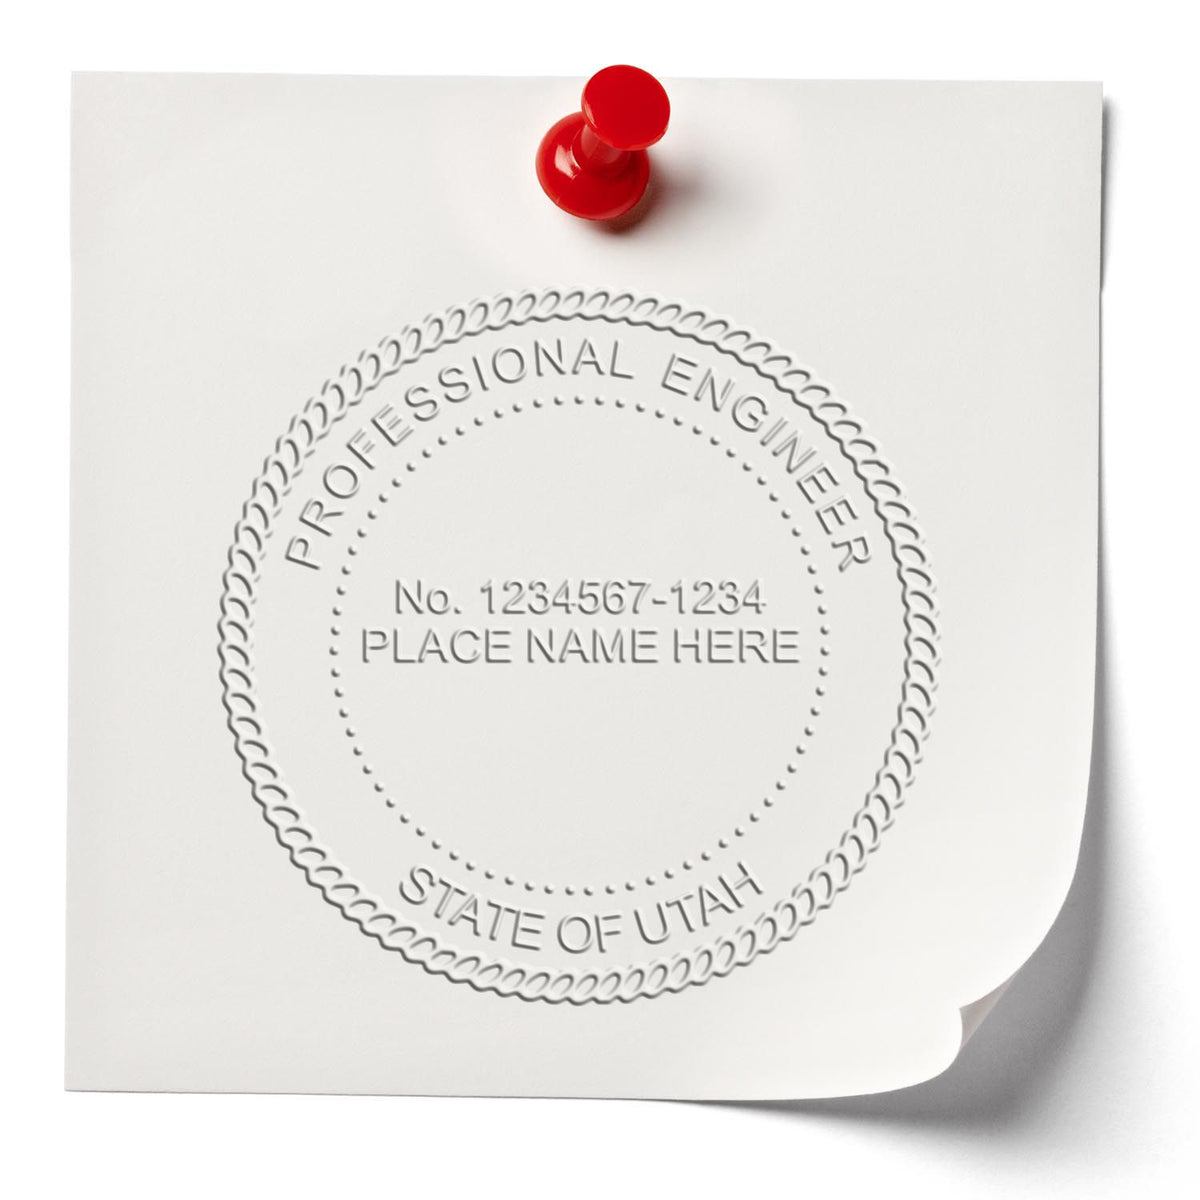 The State of Utah Extended Long Reach Engineer Seal stamp impression comes to life with a crisp, detailed photo on paper - showcasing true professional quality.